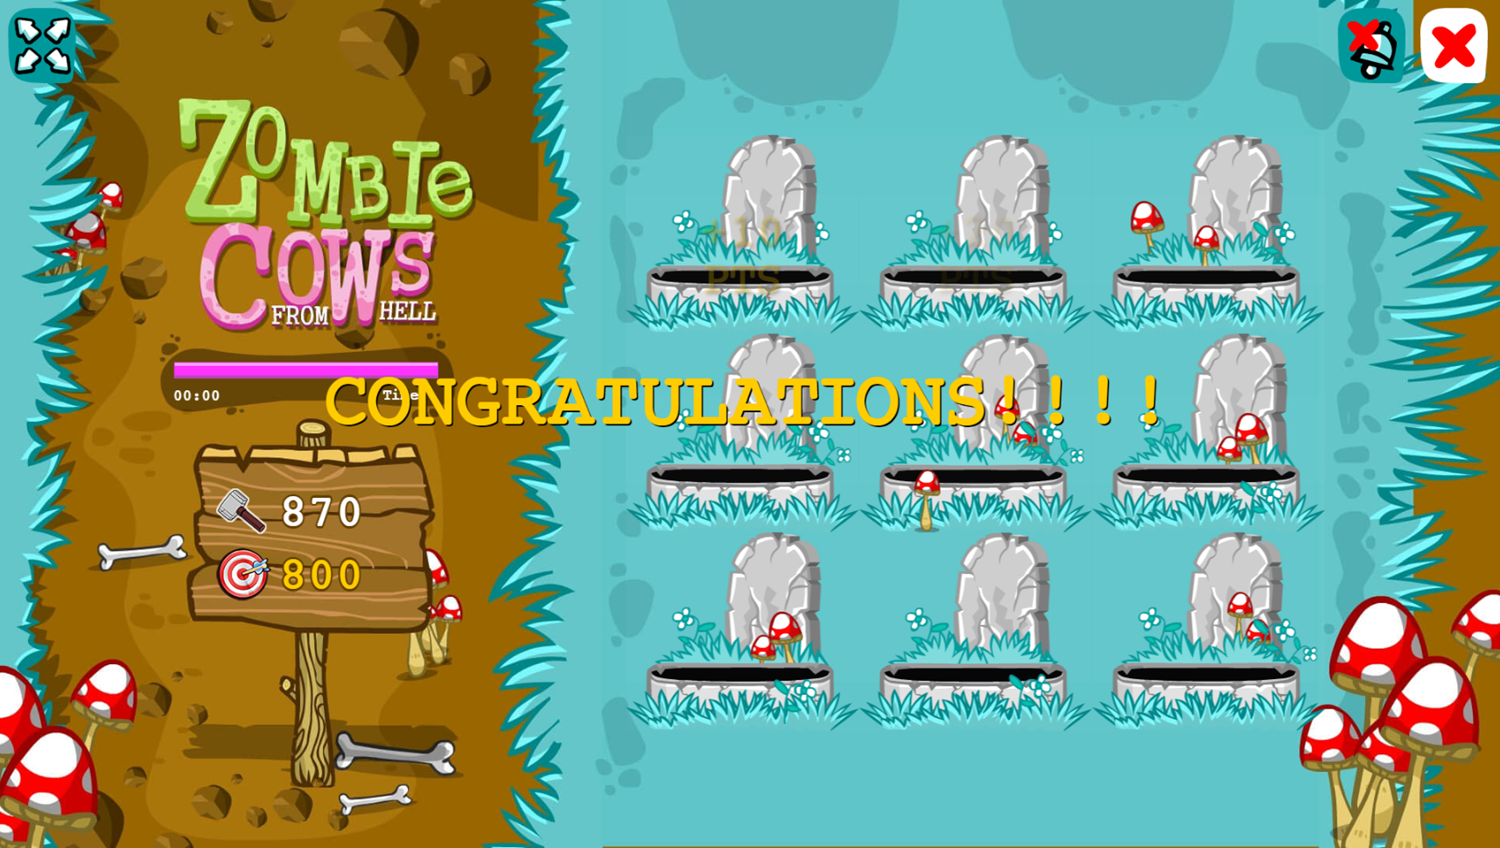 Zombie Cows From Hell Game Level Complete Screenshot.